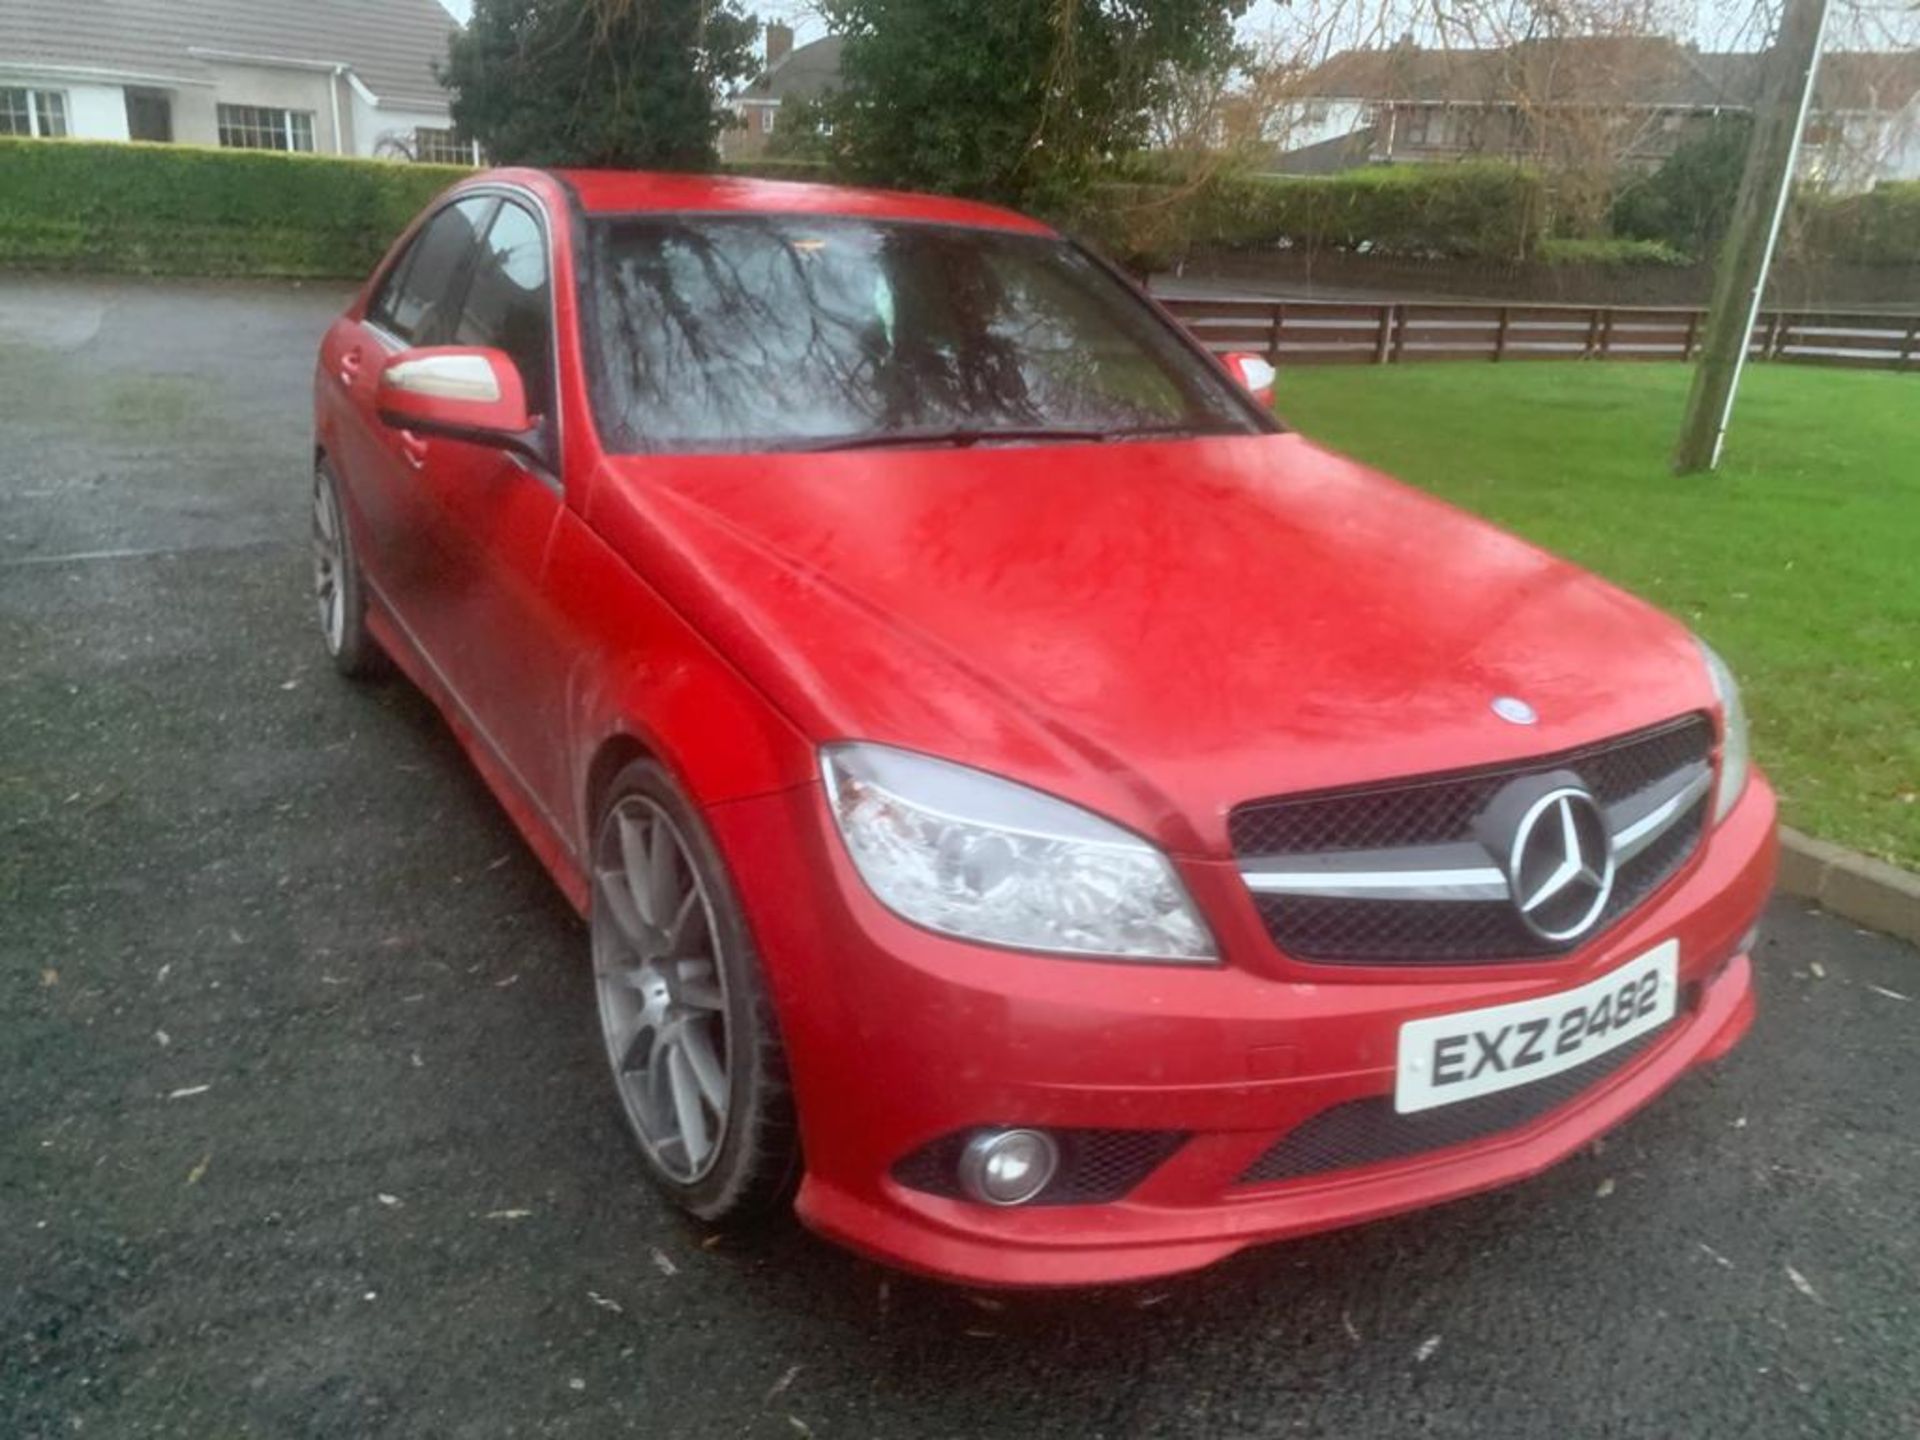 2009 MERCEDES C200 SPORT CDI AUTOMATIC 2.2 DIESEL RED 4 DOOR SALOON, SHOWING 2 FORMER KEEPERS - Image 2 of 12